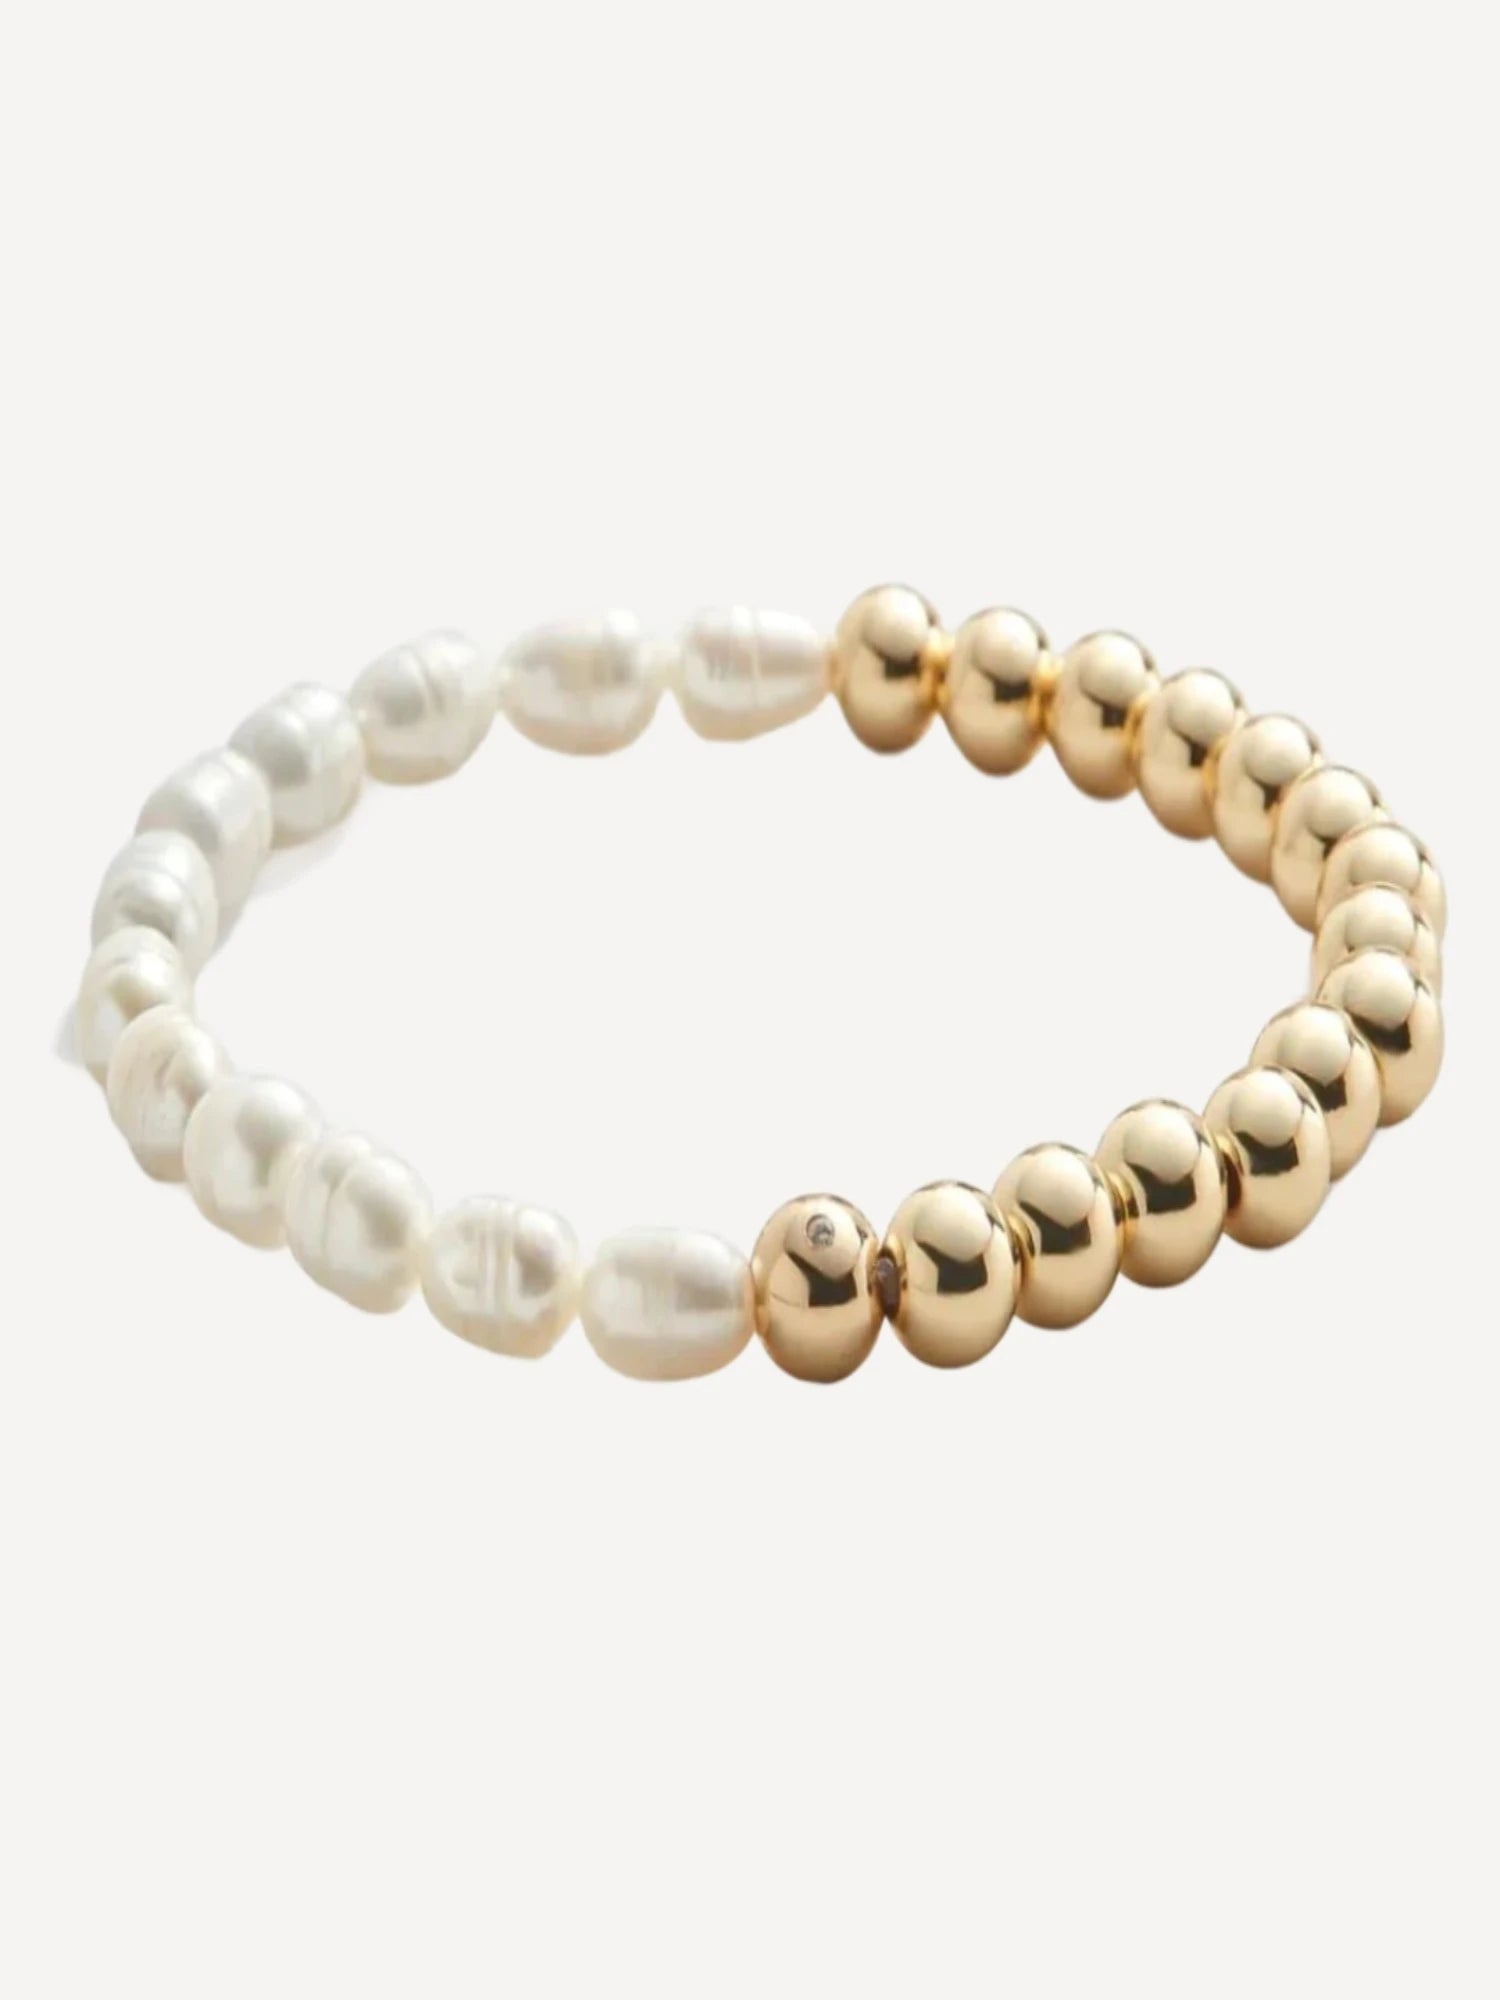 Gold Bead and Pearl Bracelet